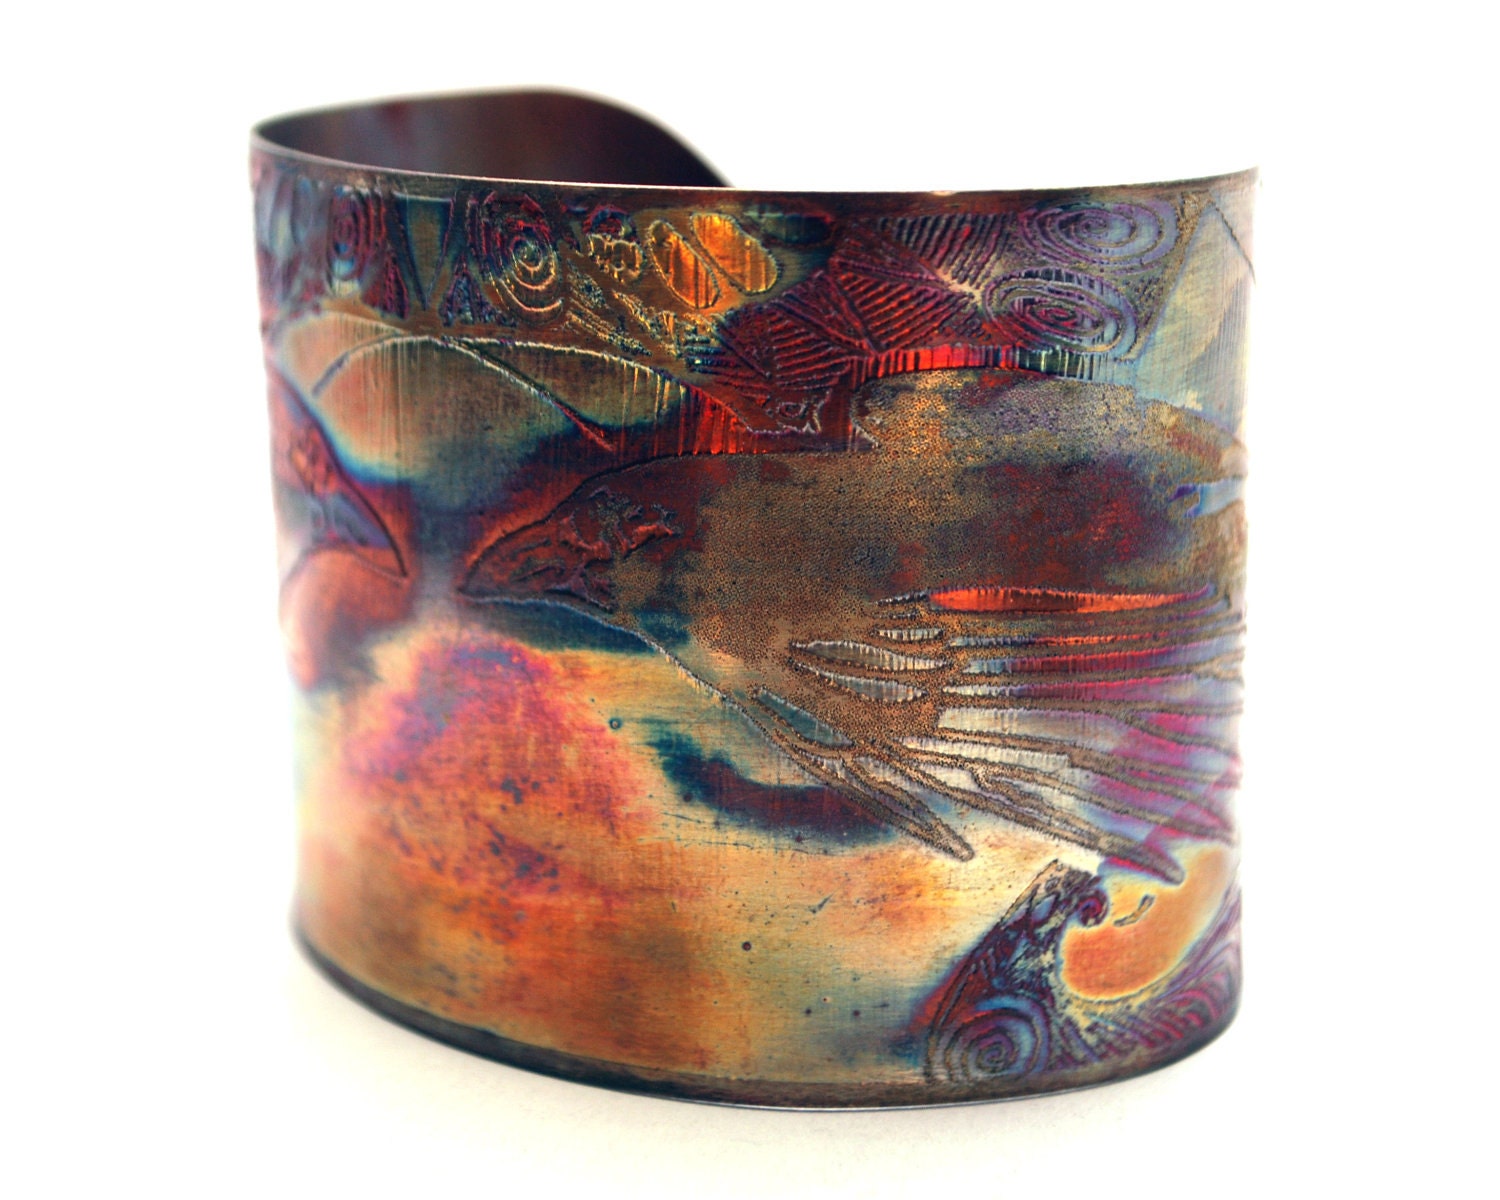 Etched copper crow raven cuff bracelet - annamcdade